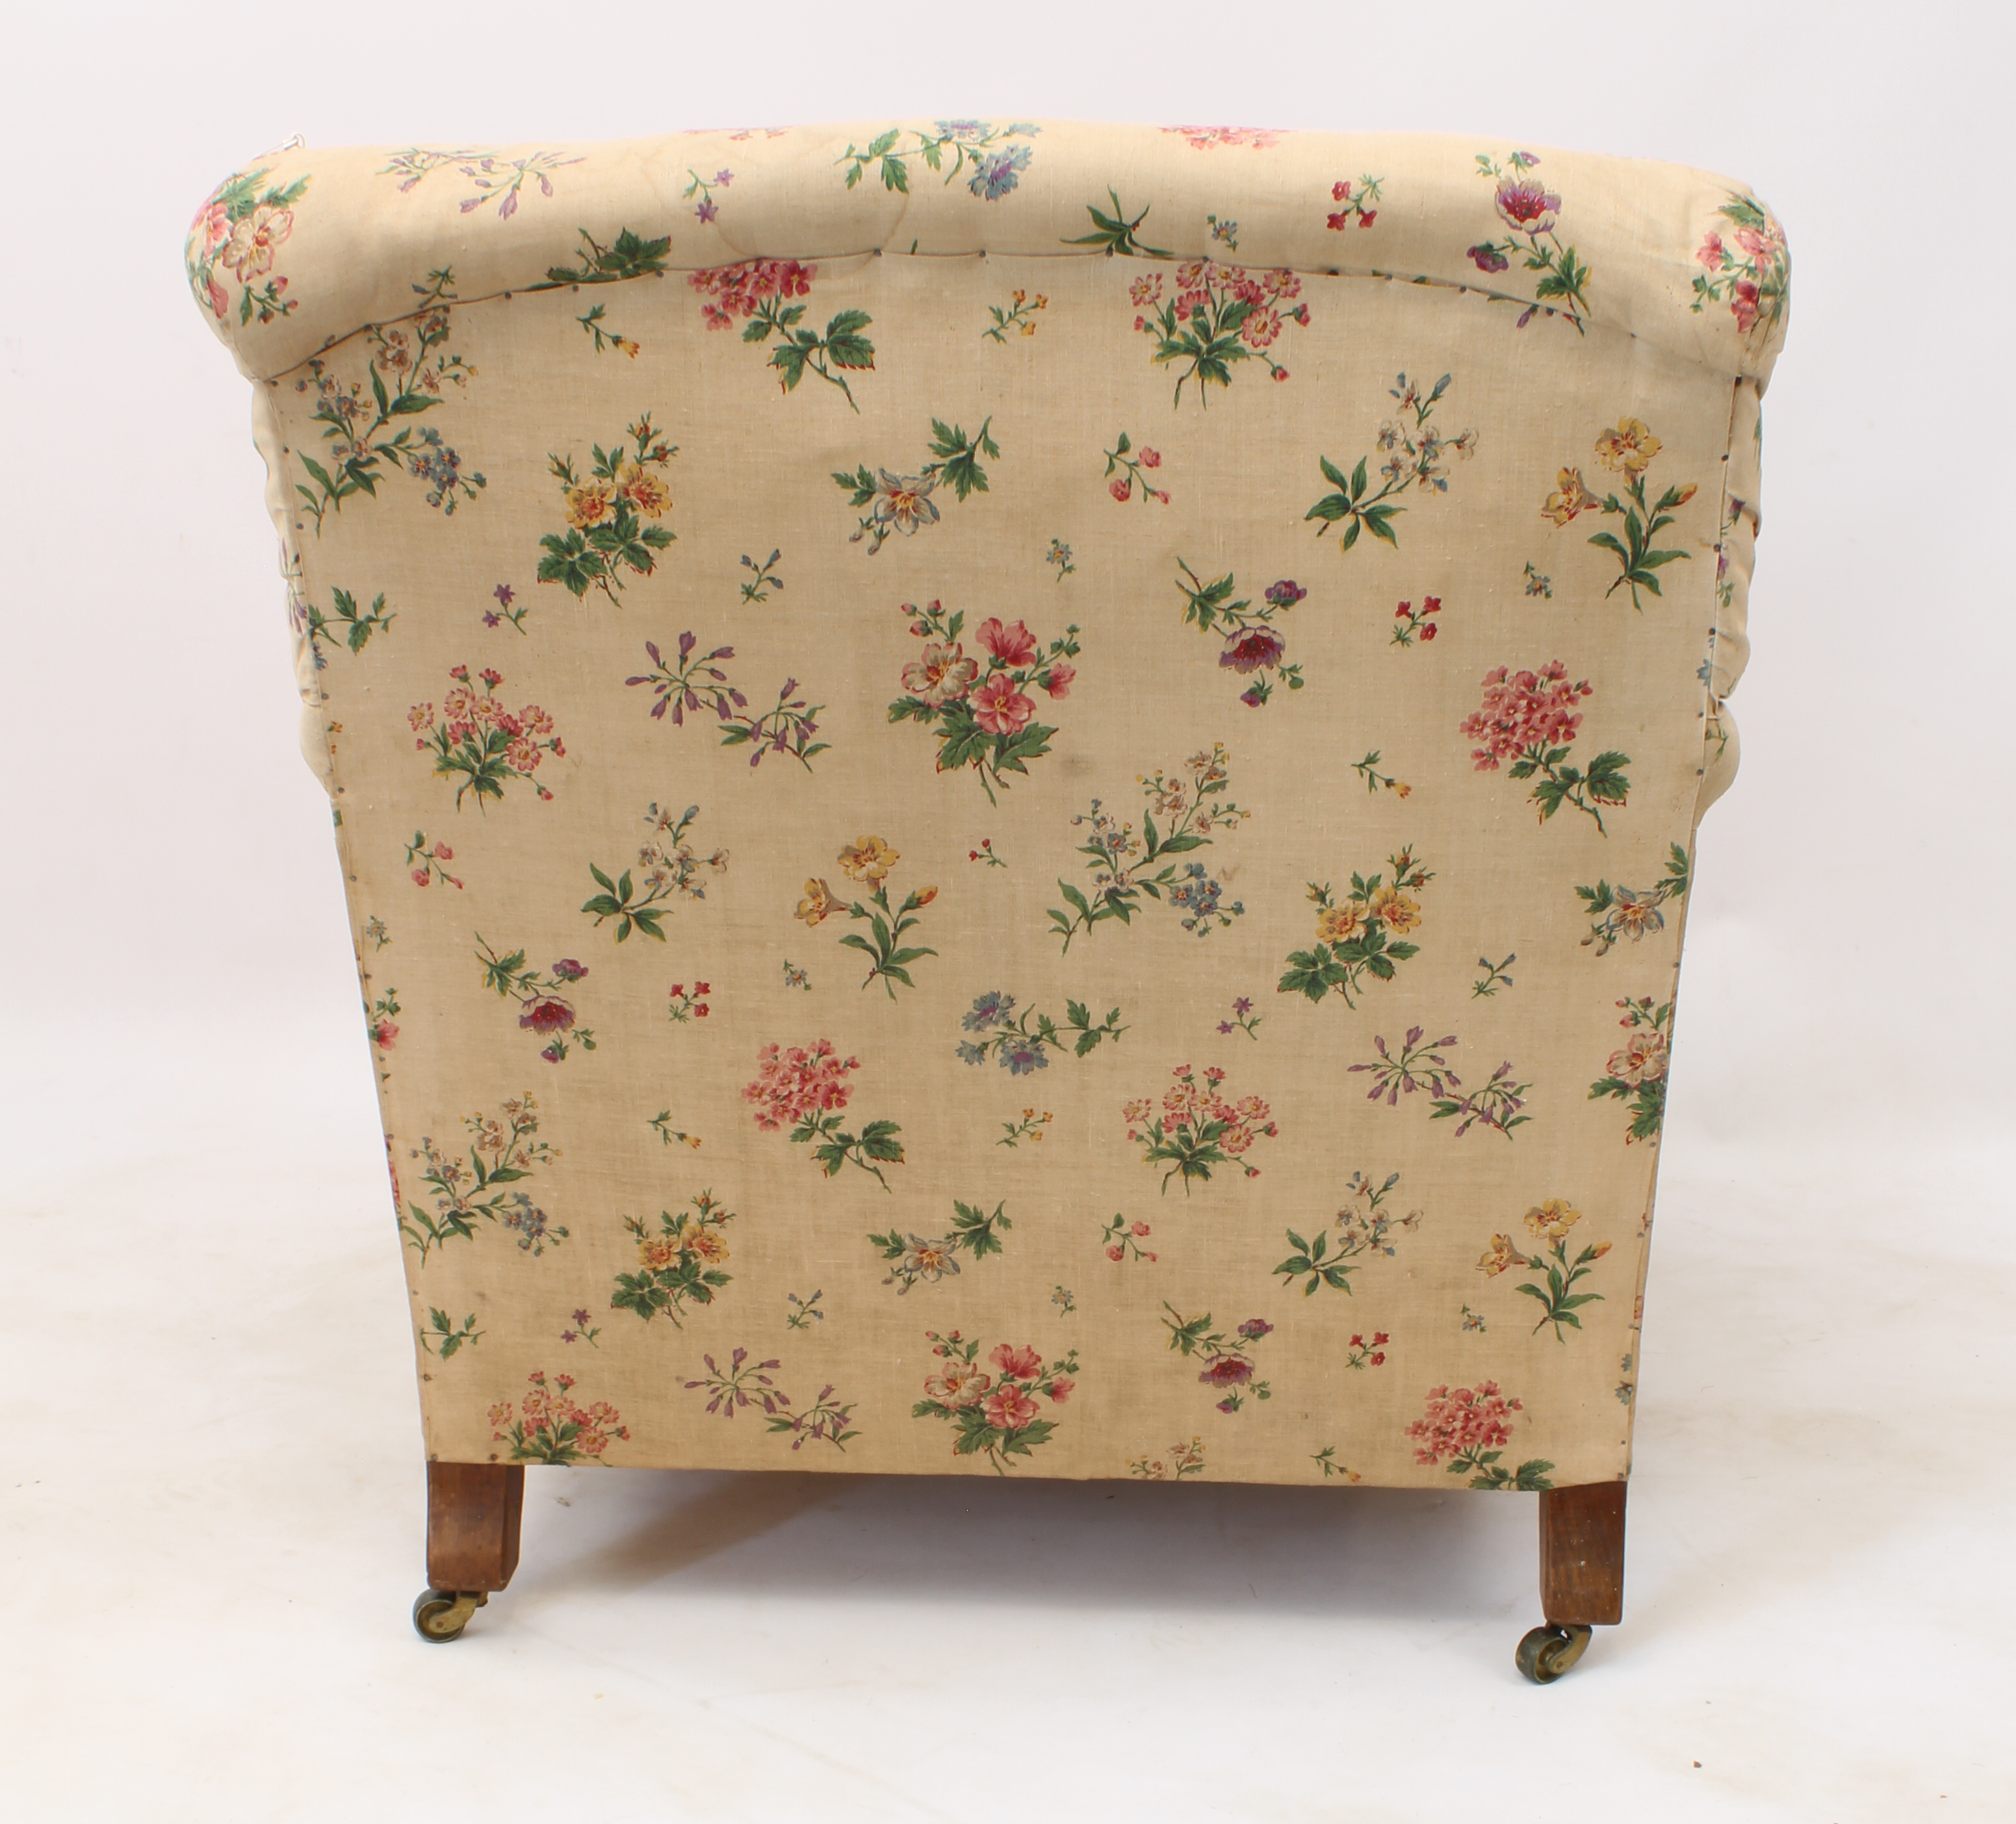 An early 20th century armchair by Howard & Sons - upholstered in early 20th century printed floral - Image 5 of 16